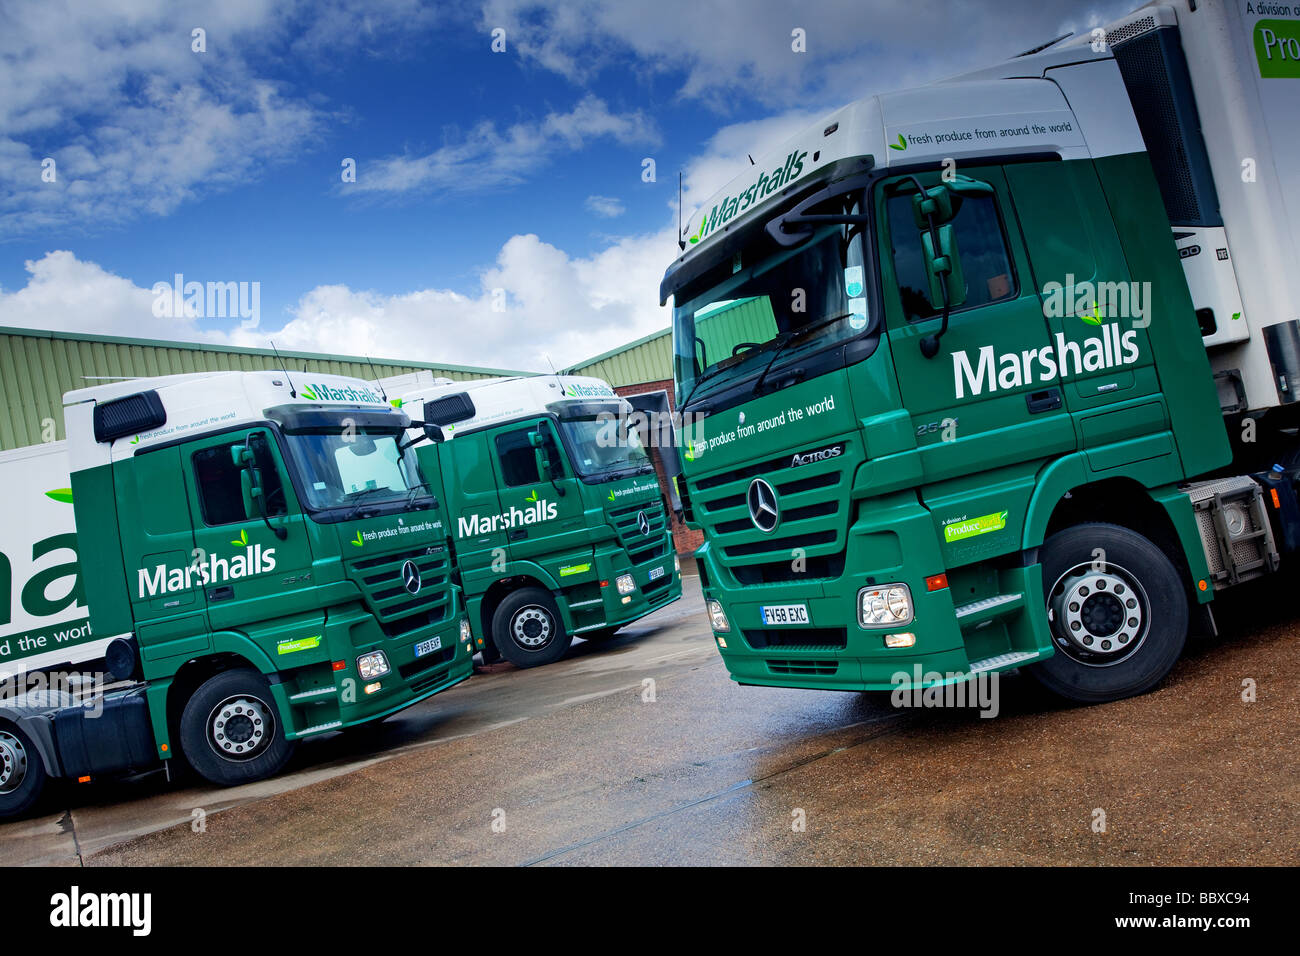 Mercedes Benz trucks in an industrial setting Stock Photo